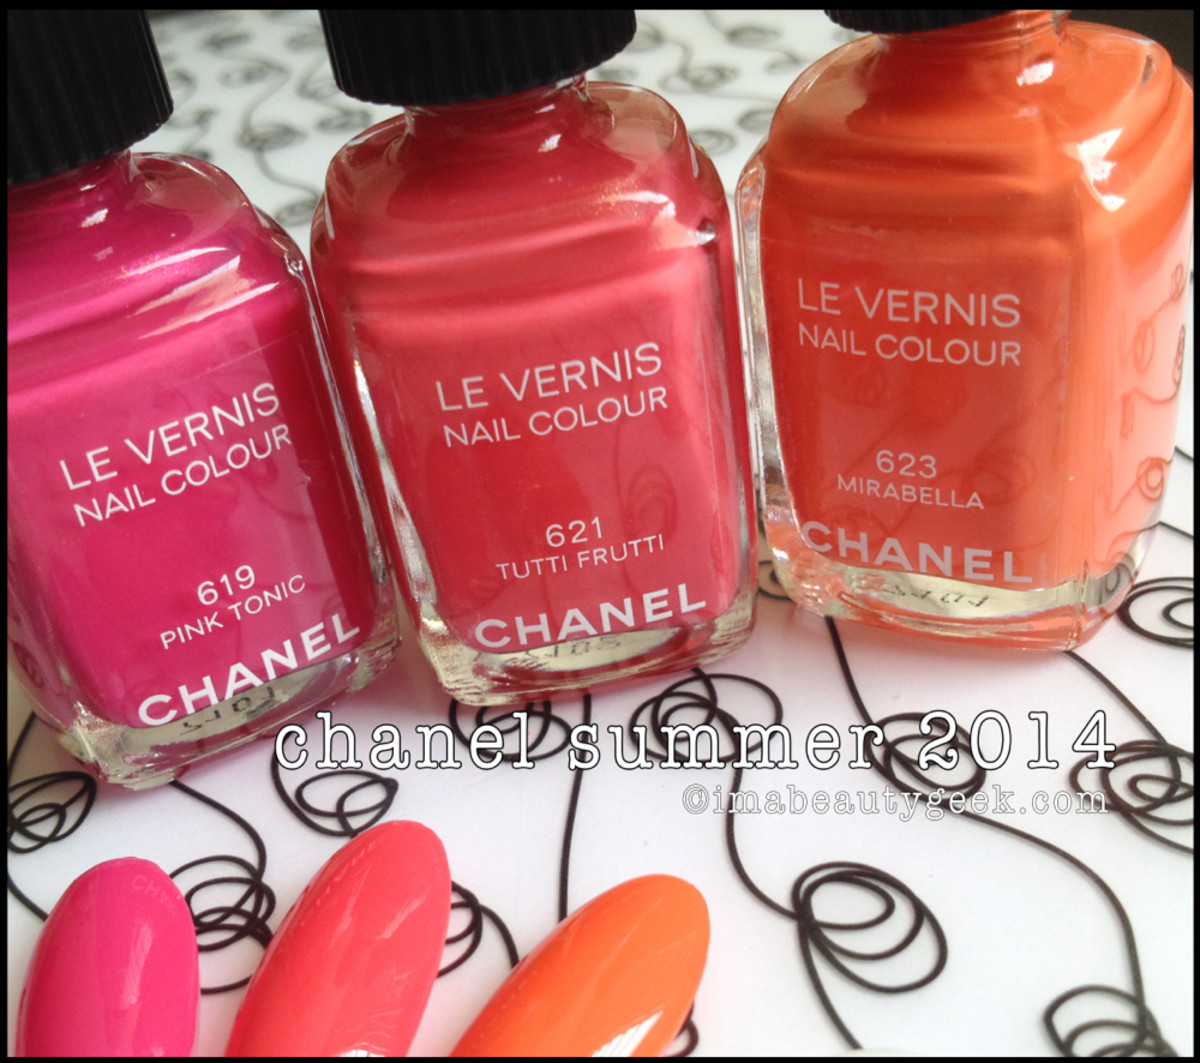 Chanel Summer 2014: The Other 3 Le Vernis Reflets d'Ete Shades